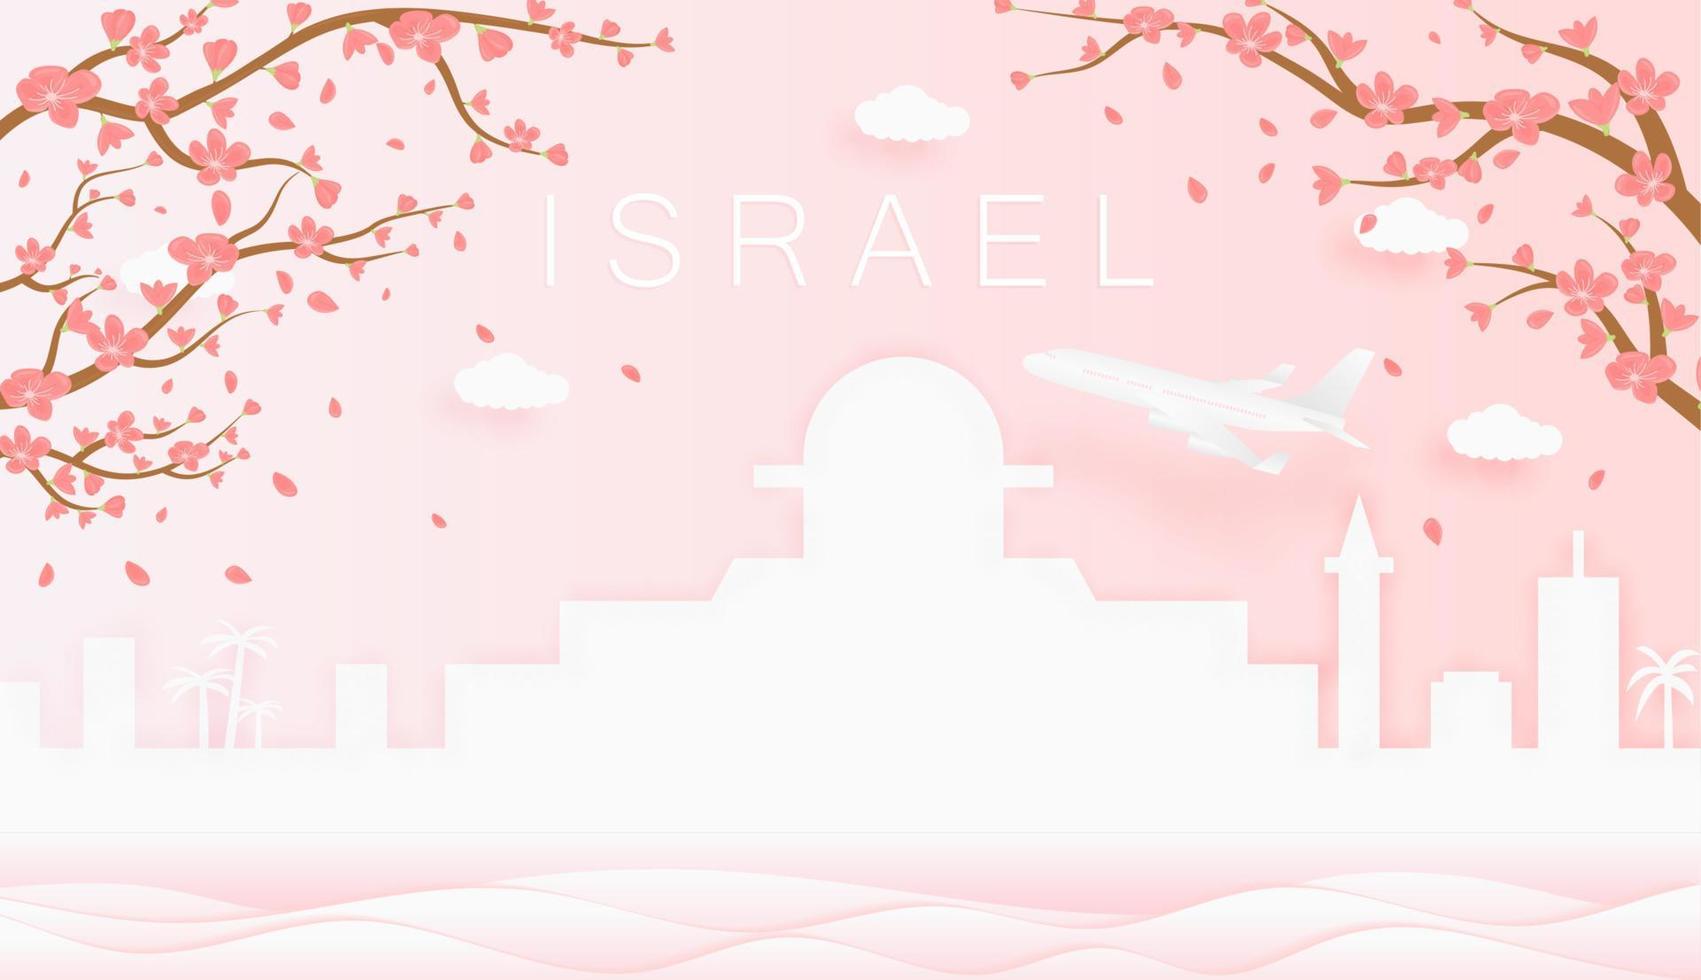 Panorama travel postcard, poster, tour advertising of world famous landmarks of Israel, spring season with blooming flowers in tree vector